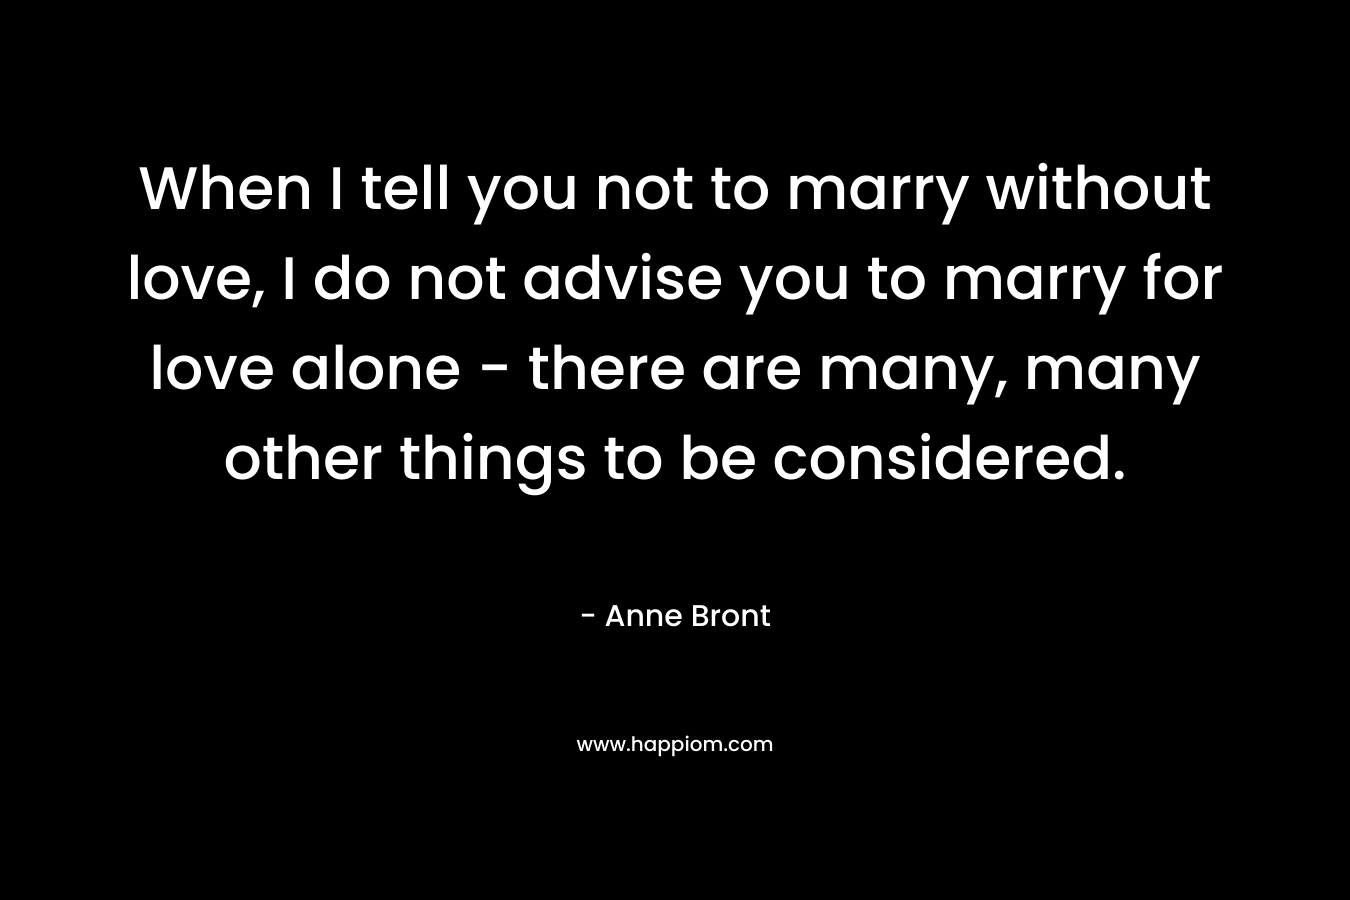 When I tell you not to marry without love, I do not advise you to marry for love alone – there are many, many other things to be considered. – Anne Bront